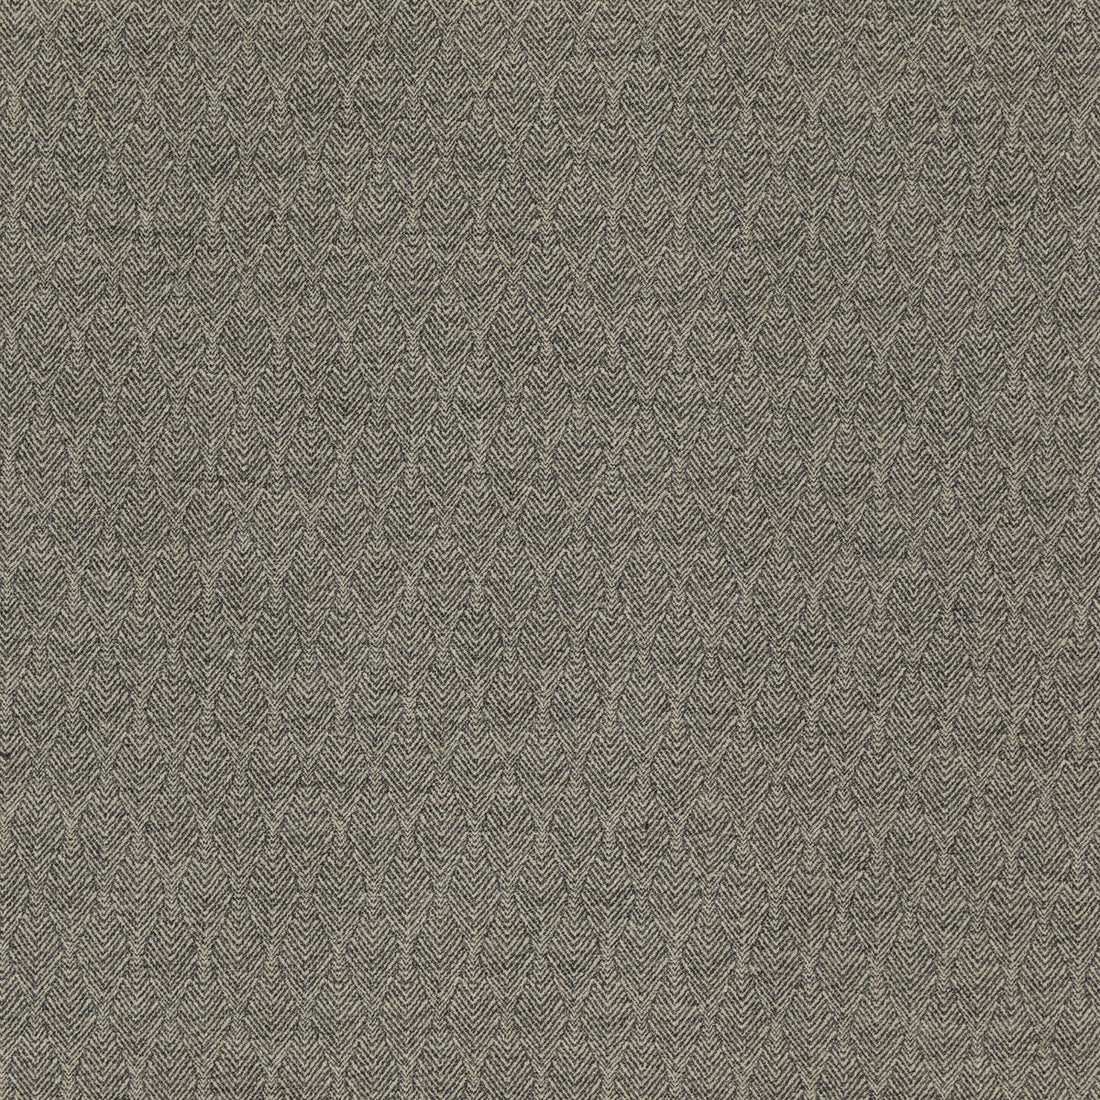 Capo fabric in ebony color - pattern ED85298.955.0 - by Threads in the Luxury Weaves collection